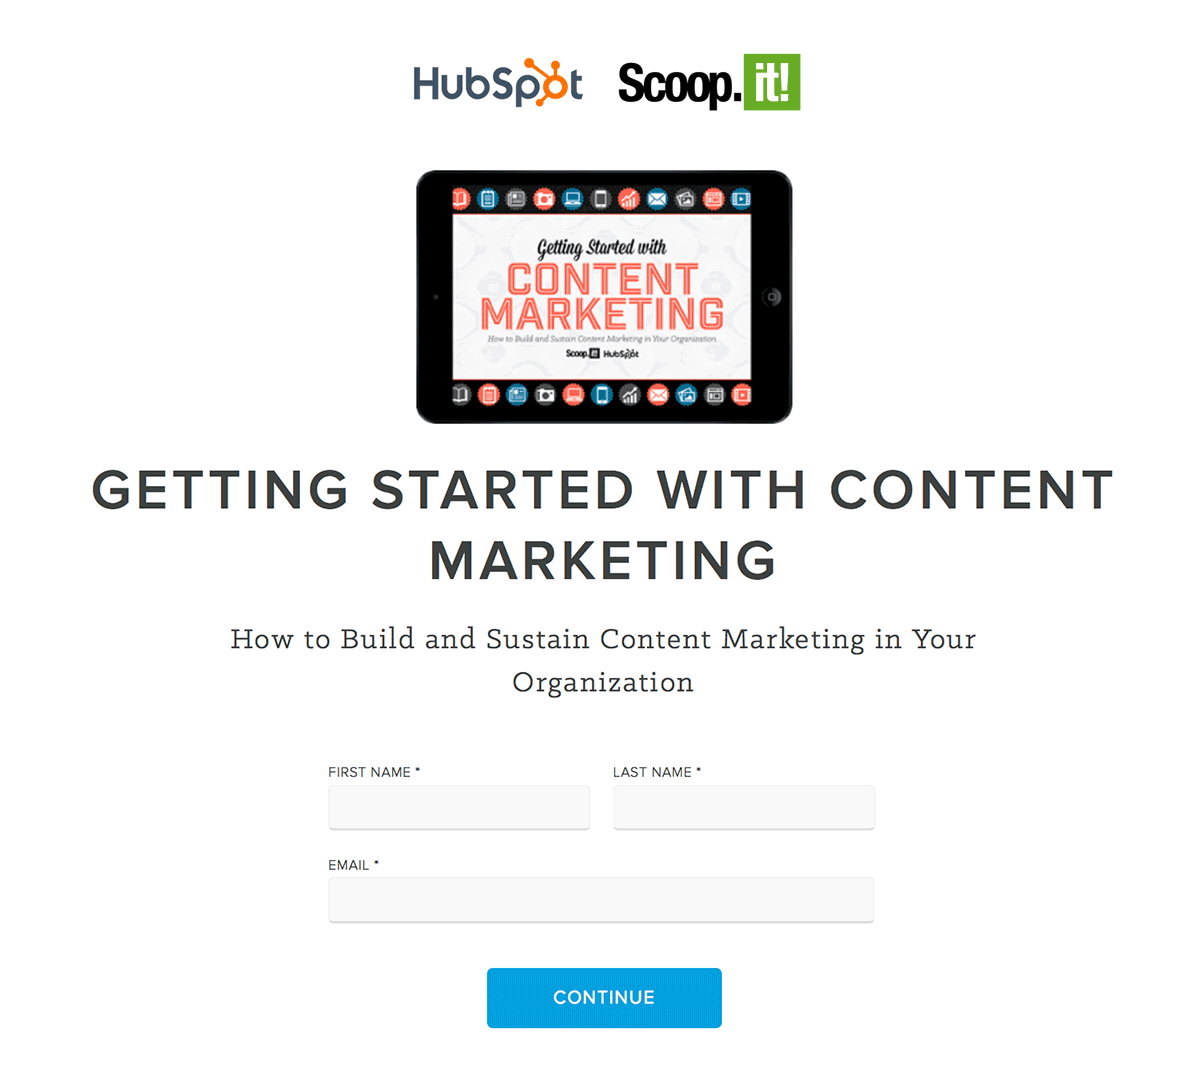 We recently gave content co-creation a spin ourselves with this new ebook we’ve just co-published with Hubspot.